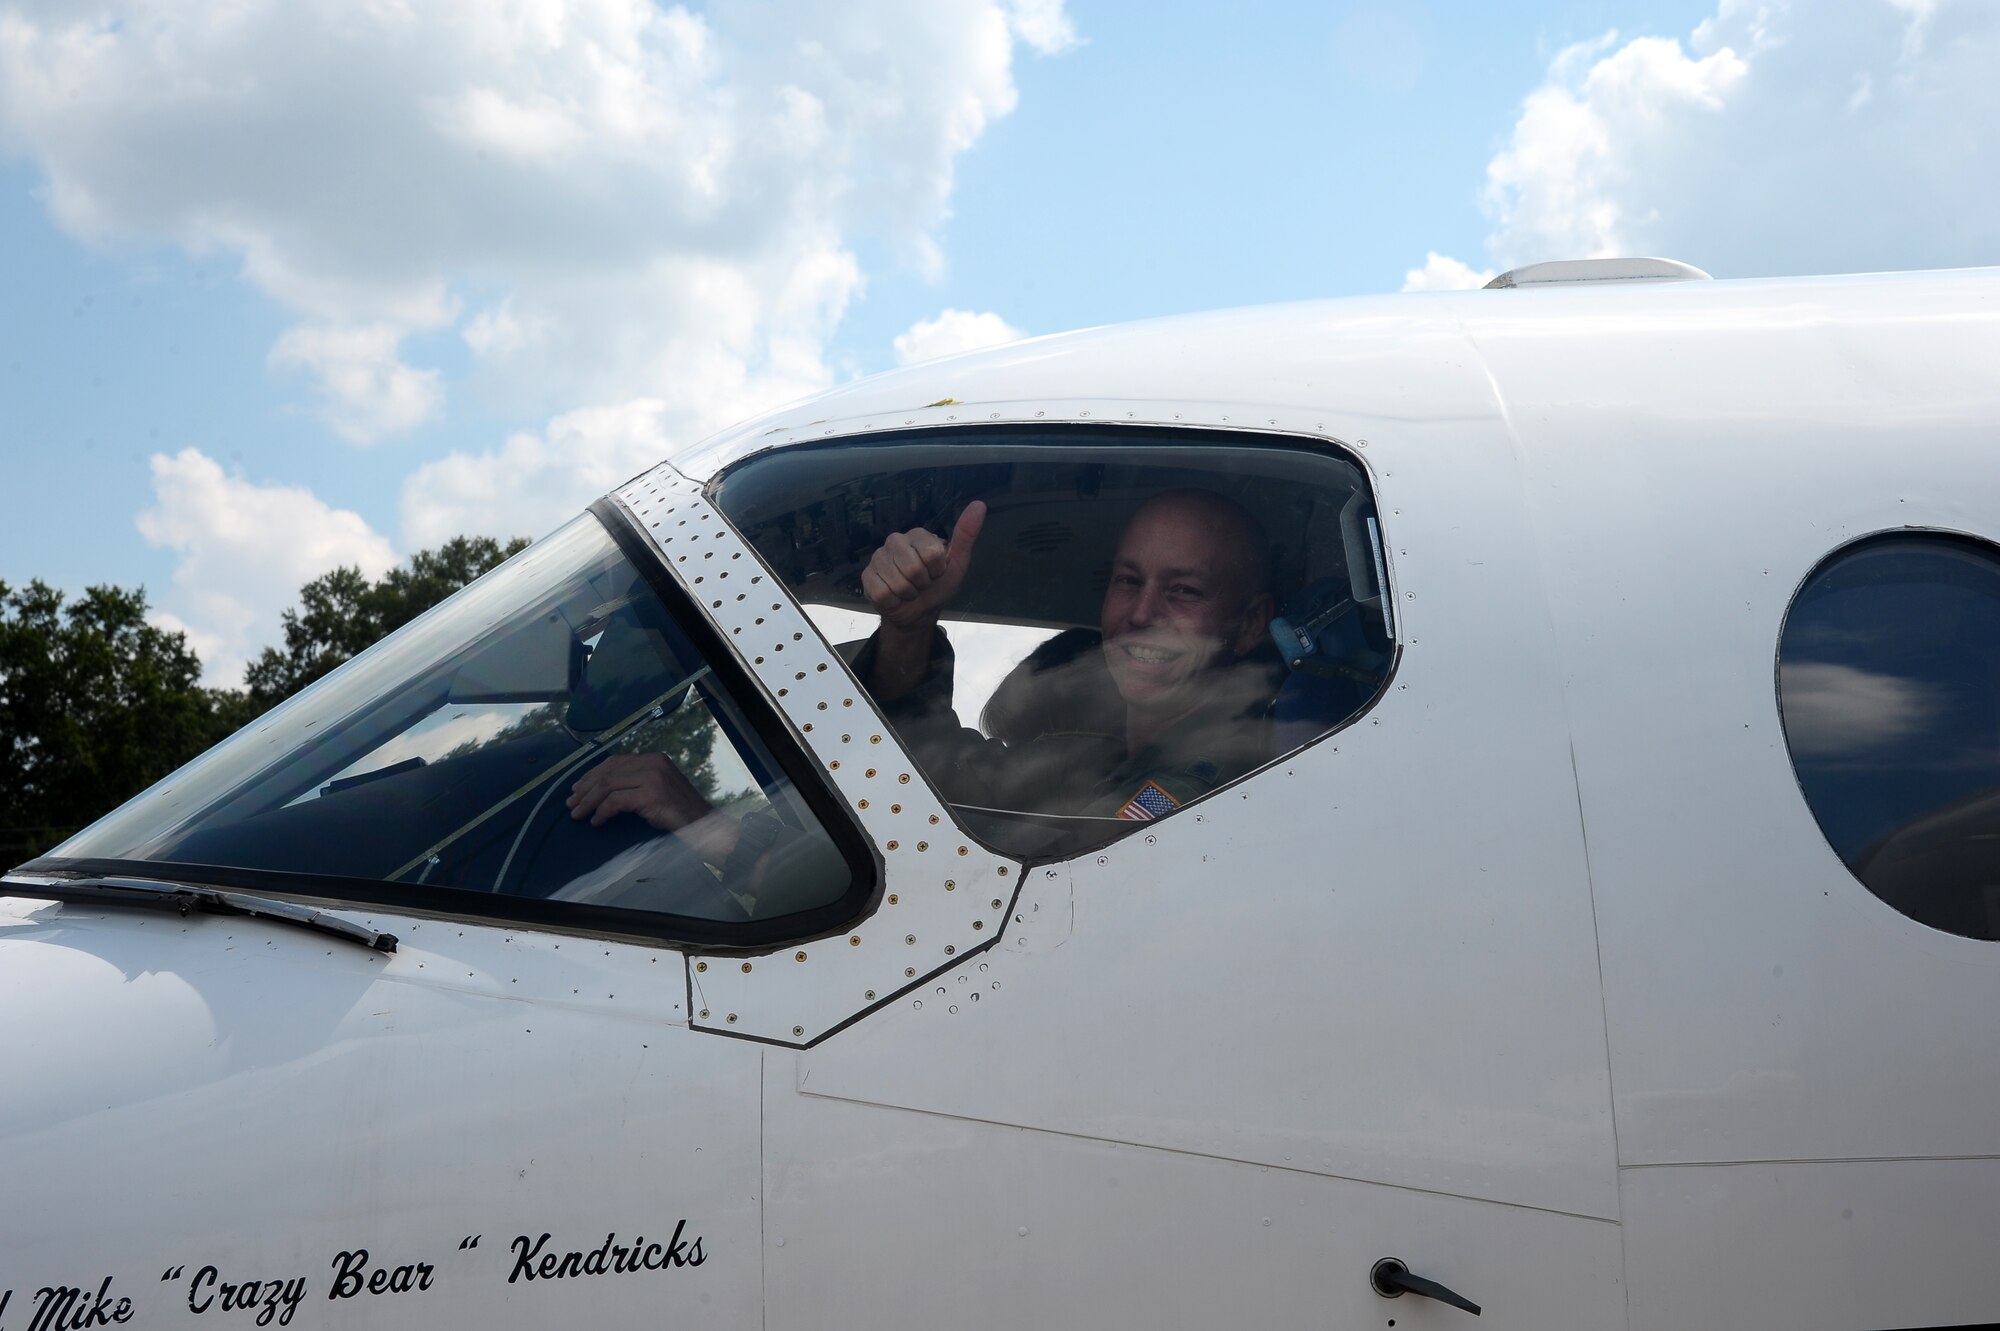 Lt. Col. Michael Kendrick, 43rd Flying Training Squadron, glances out the window of a T-1A Jayhawk after landing from his fini-flight Aug. 14 on the Columbus Air Force Base flight line. The fini-flight is a military aviation tradition and here marked Kendricks’s retirement from the Air Force upon completion of his final flight on Columbus AFB. Upon completion of the fini-flight, it is tradition to spray down or douse the pilot in water upon leaving the aircraft. (U.S. Air Force Photo/Airman 1st Class Stephanie Englar)